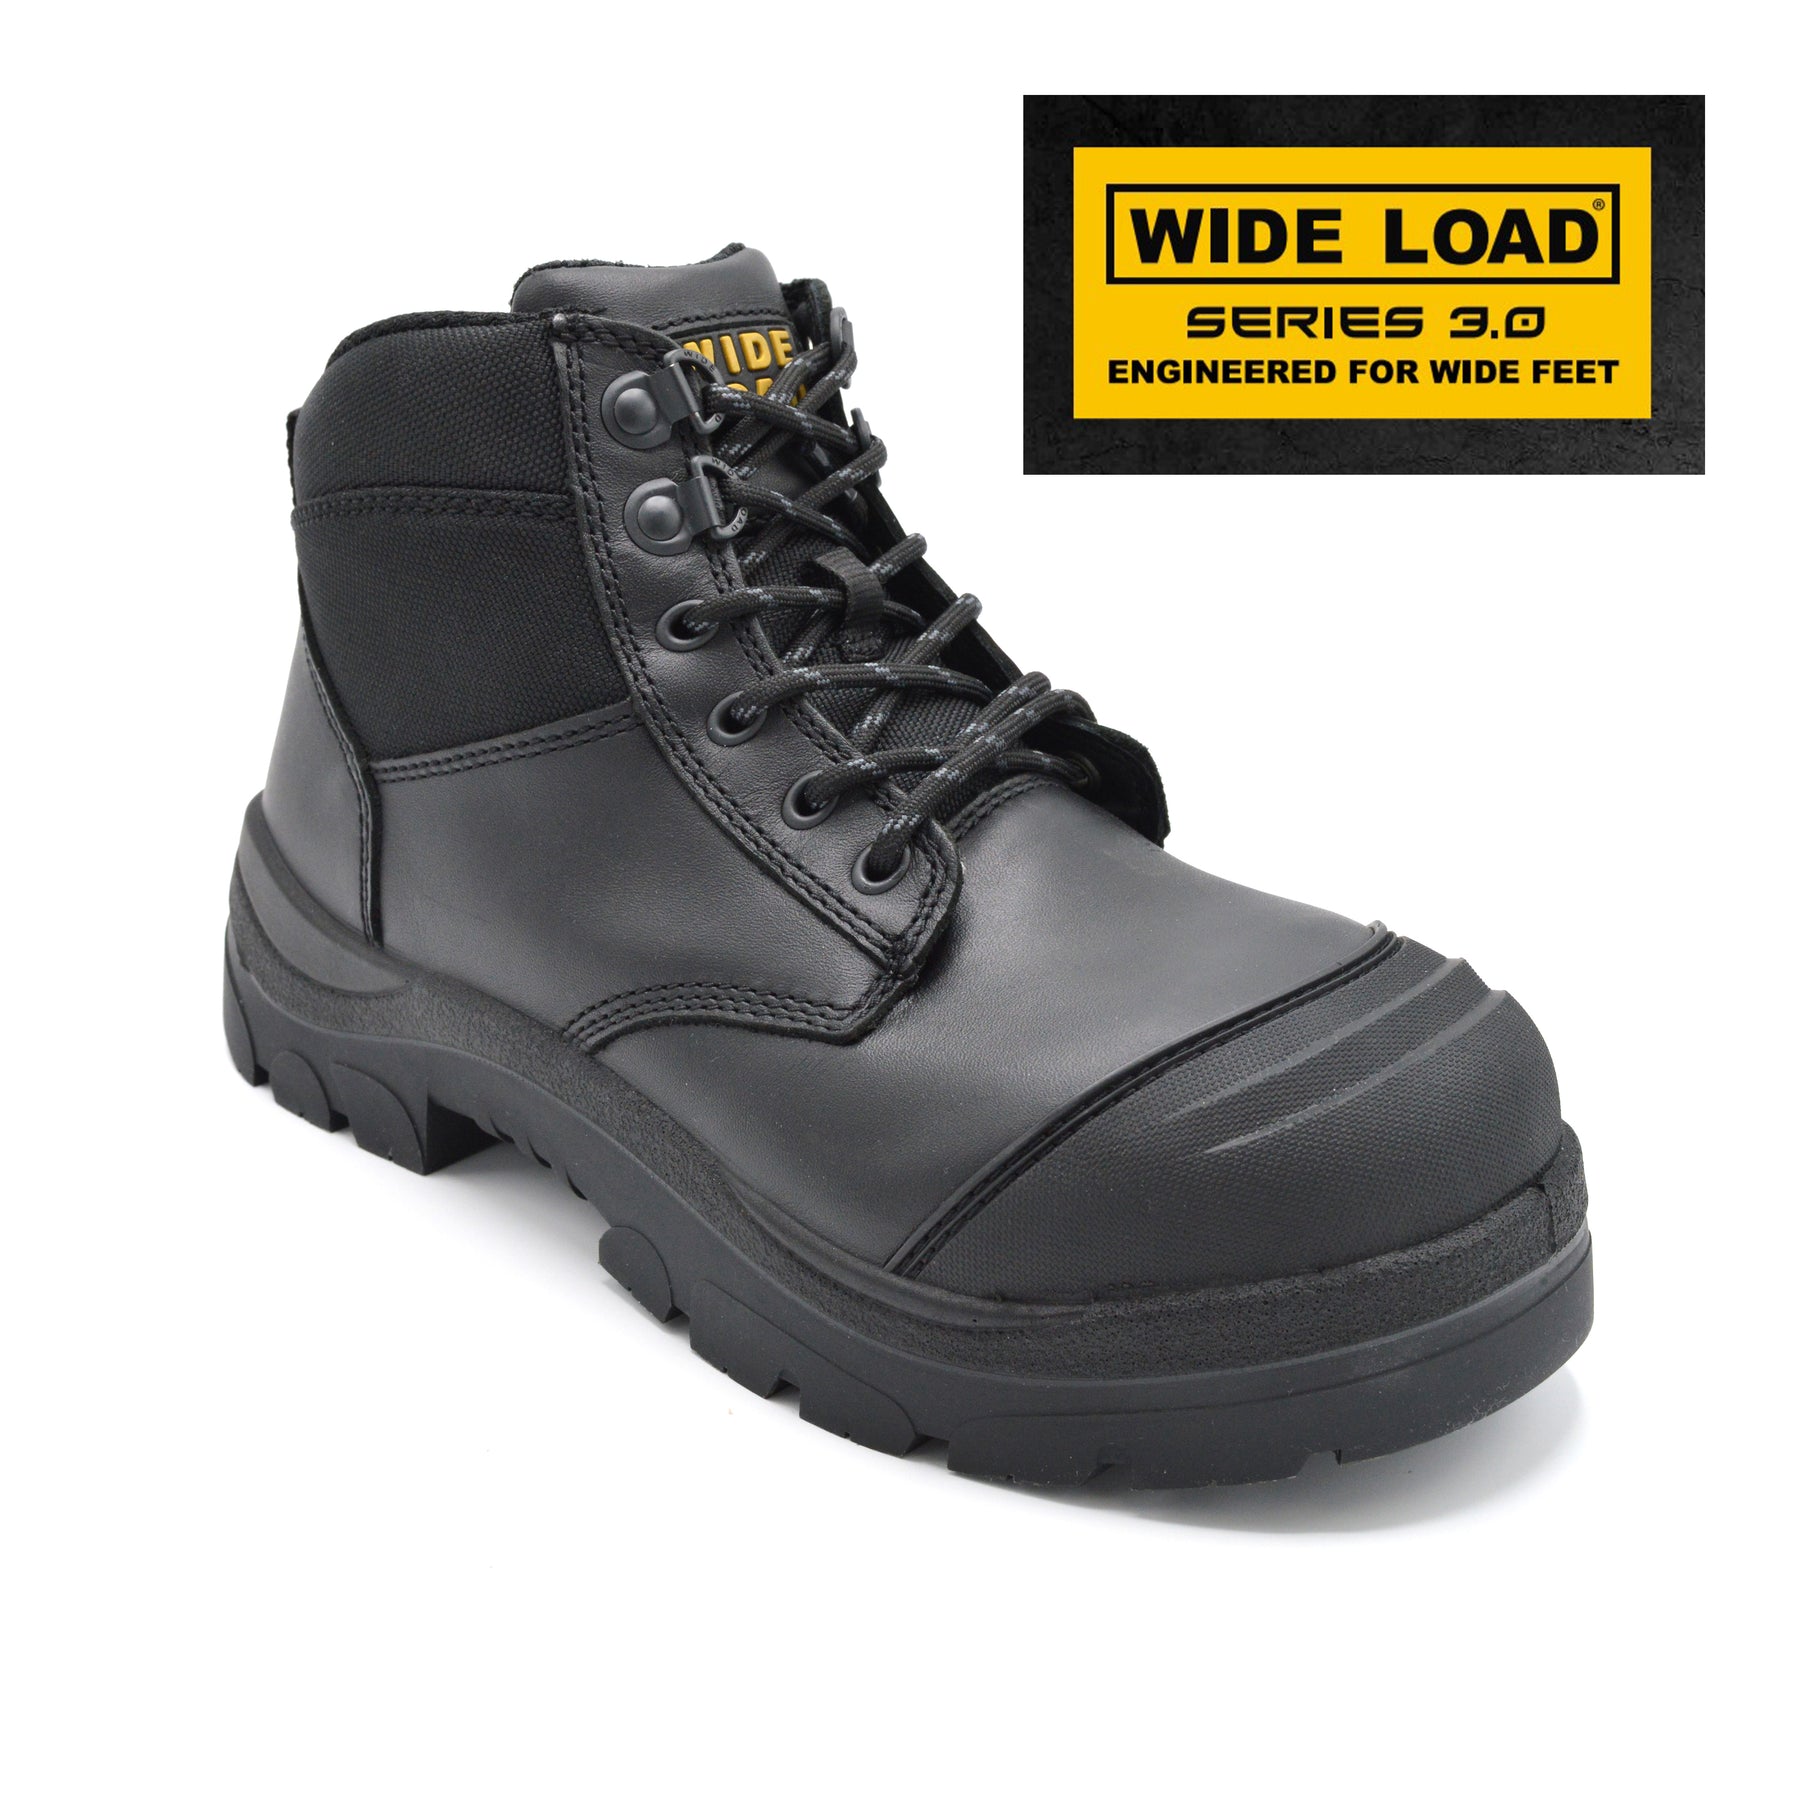 Wide Fitting Work Boots For Wide Feet Bunions And Gout